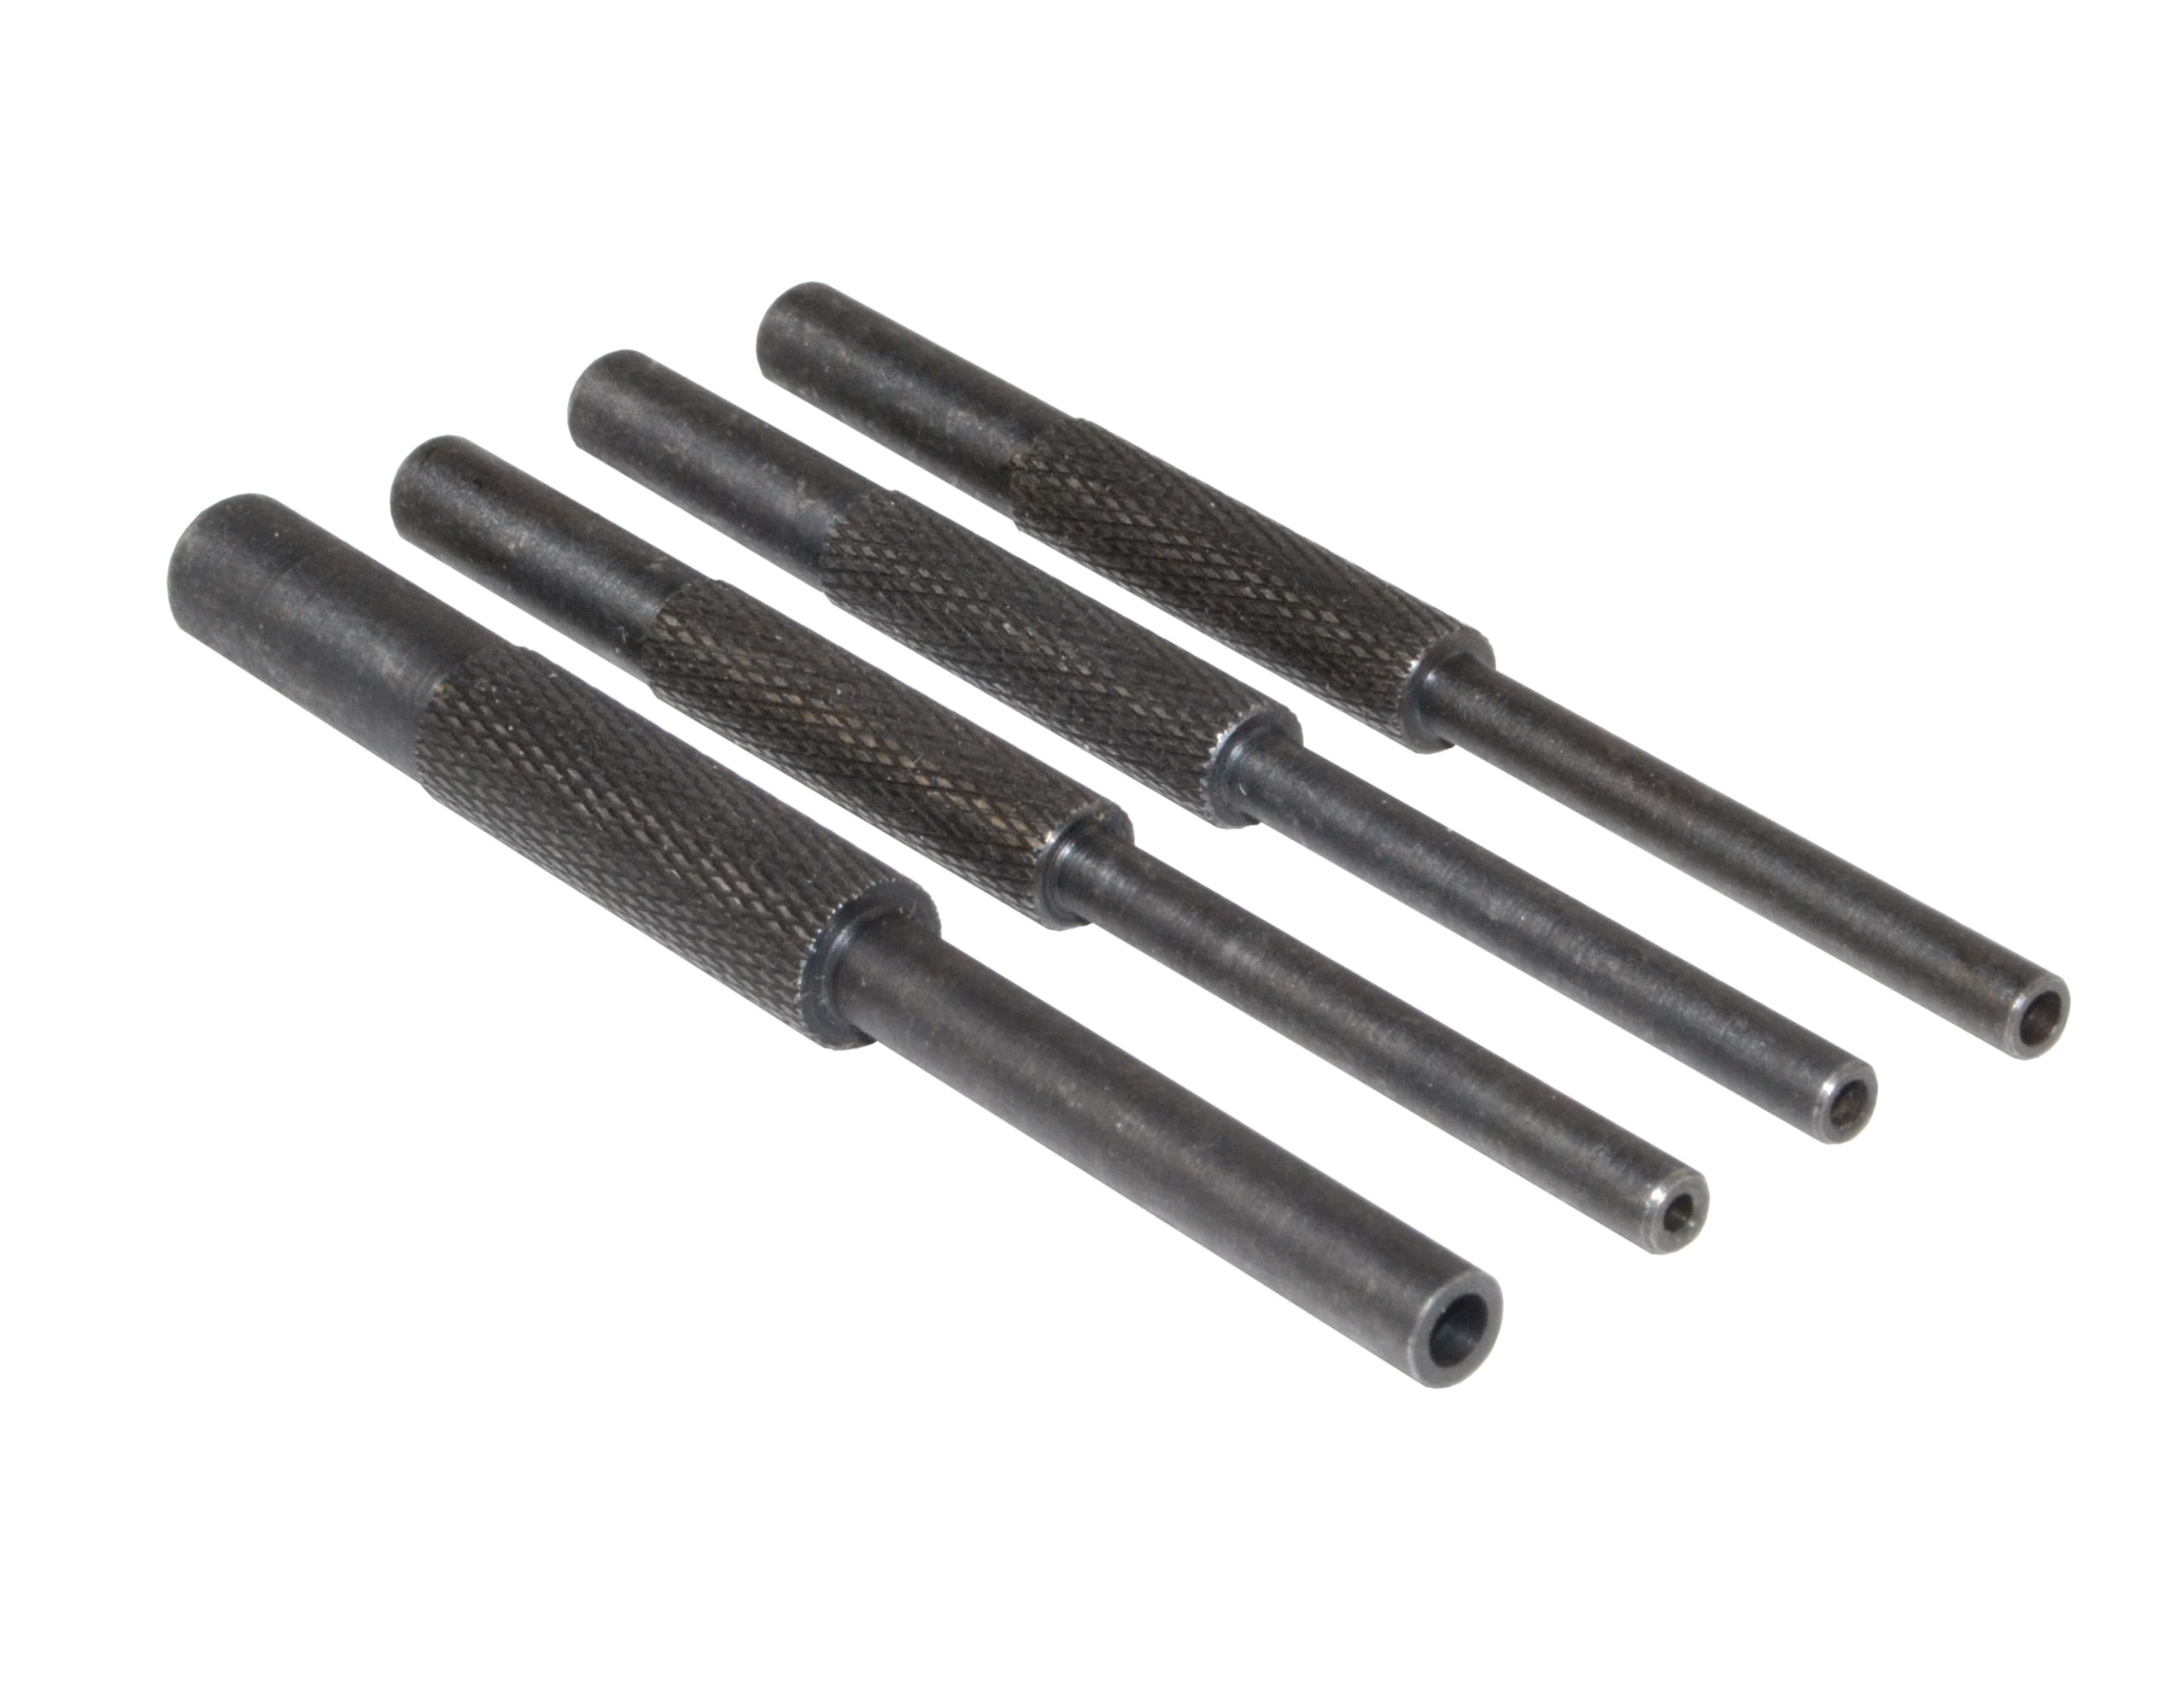 Lighthouse Quality Tools set of 4 Hollow End Roll Pin Tool Starter Punch Set 